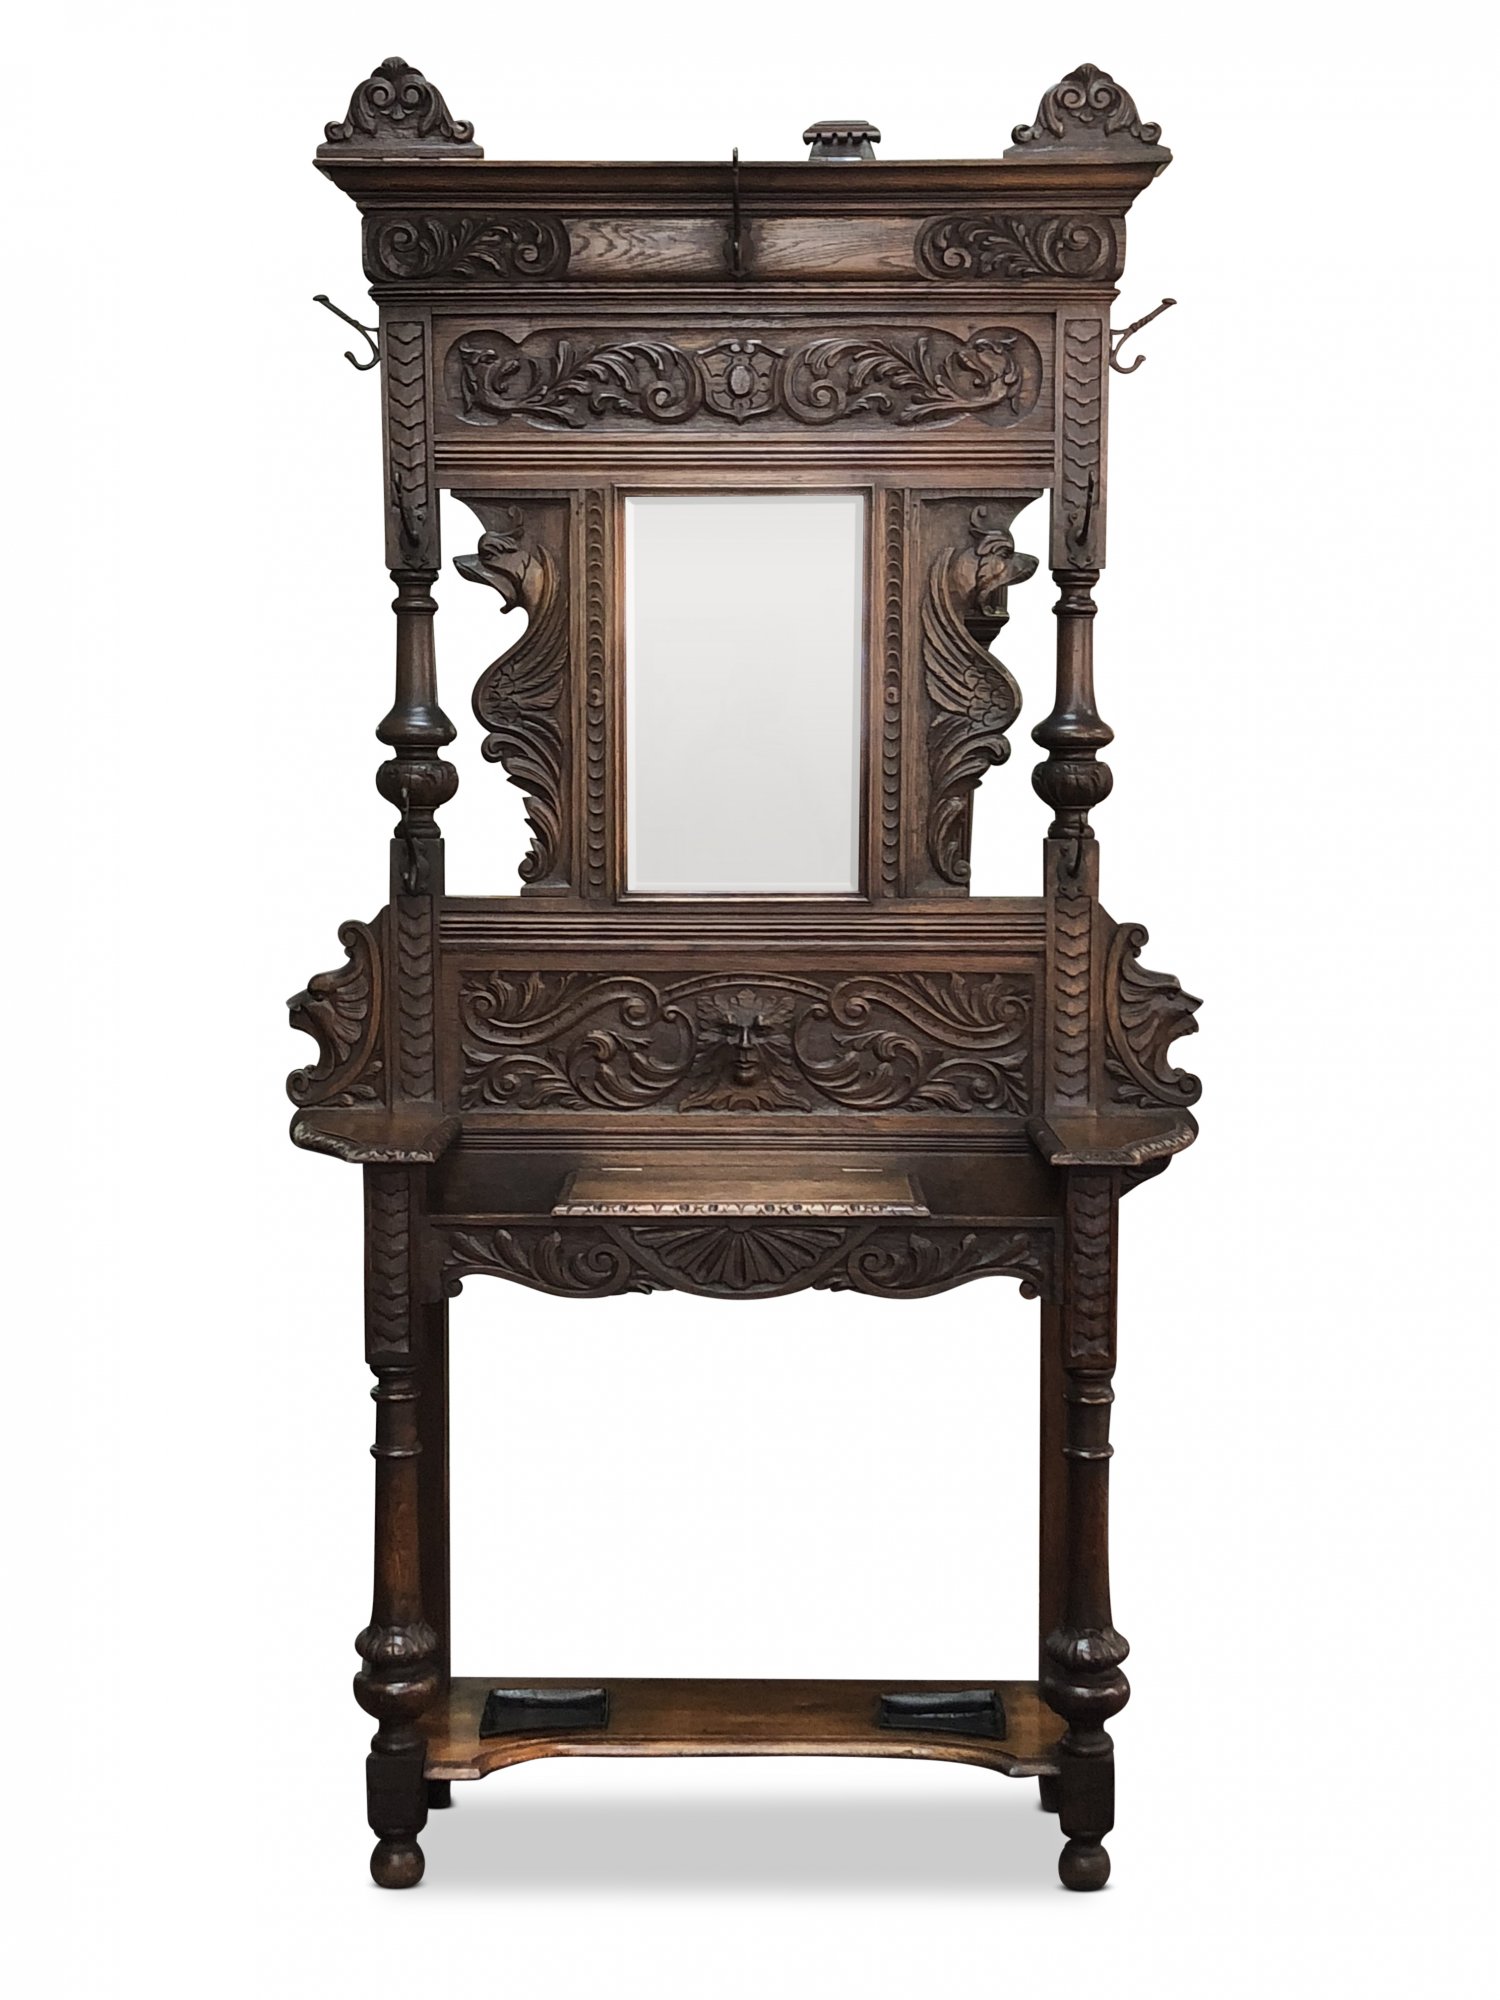 Late 19th Century English Oak Hall Stand with Ornate Mask Carvings